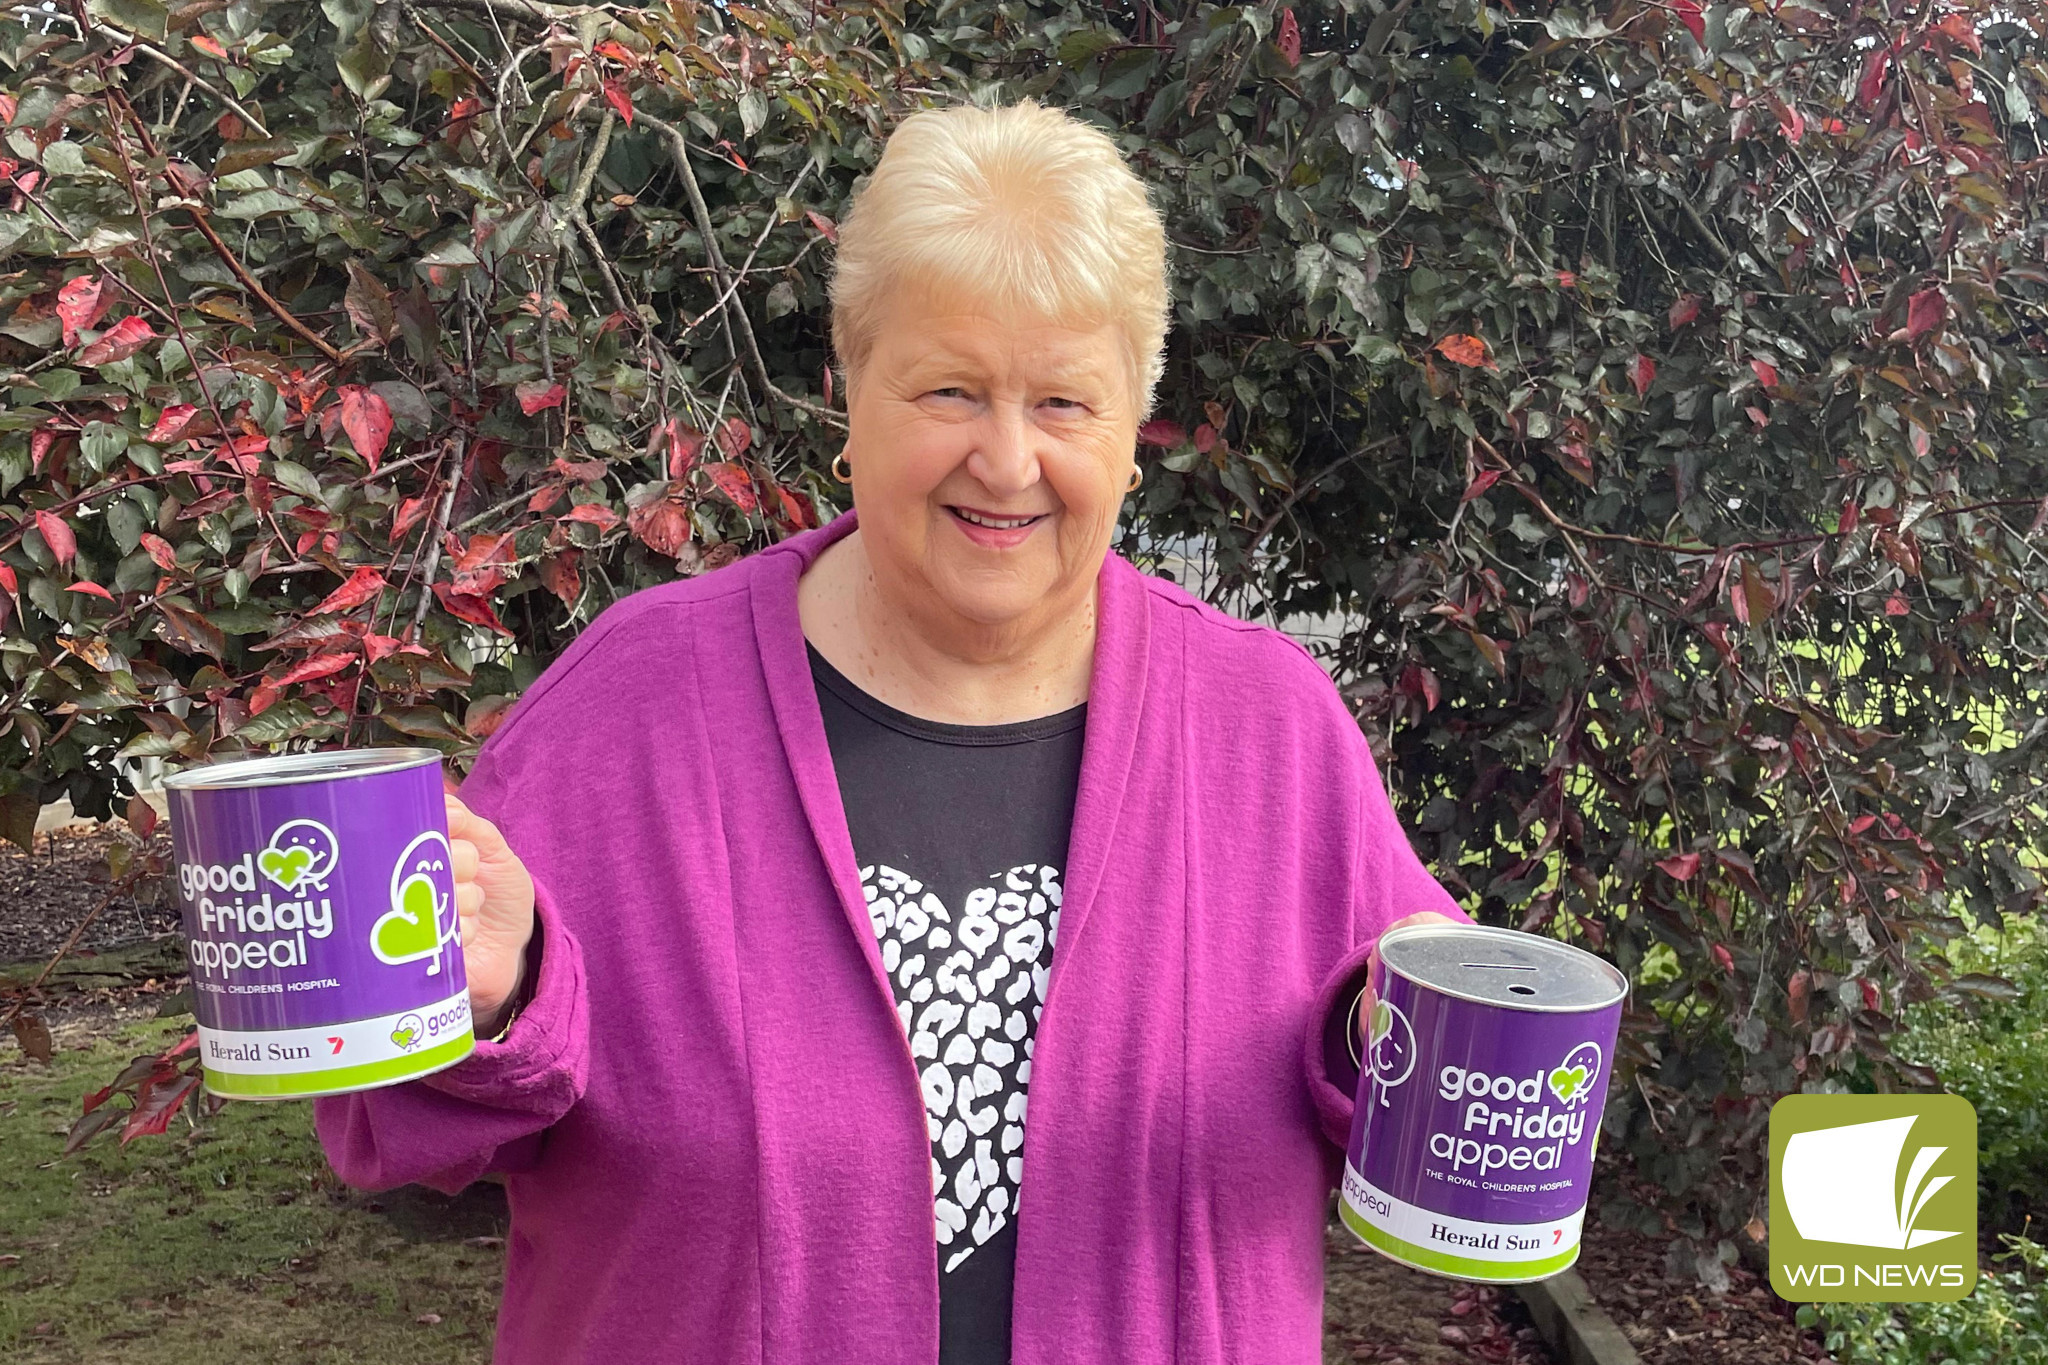 Can you help?: Cobden Good Friday appeal co-ordinator Fran Warden is encouraging the community to volunteer at this week’s appeal.